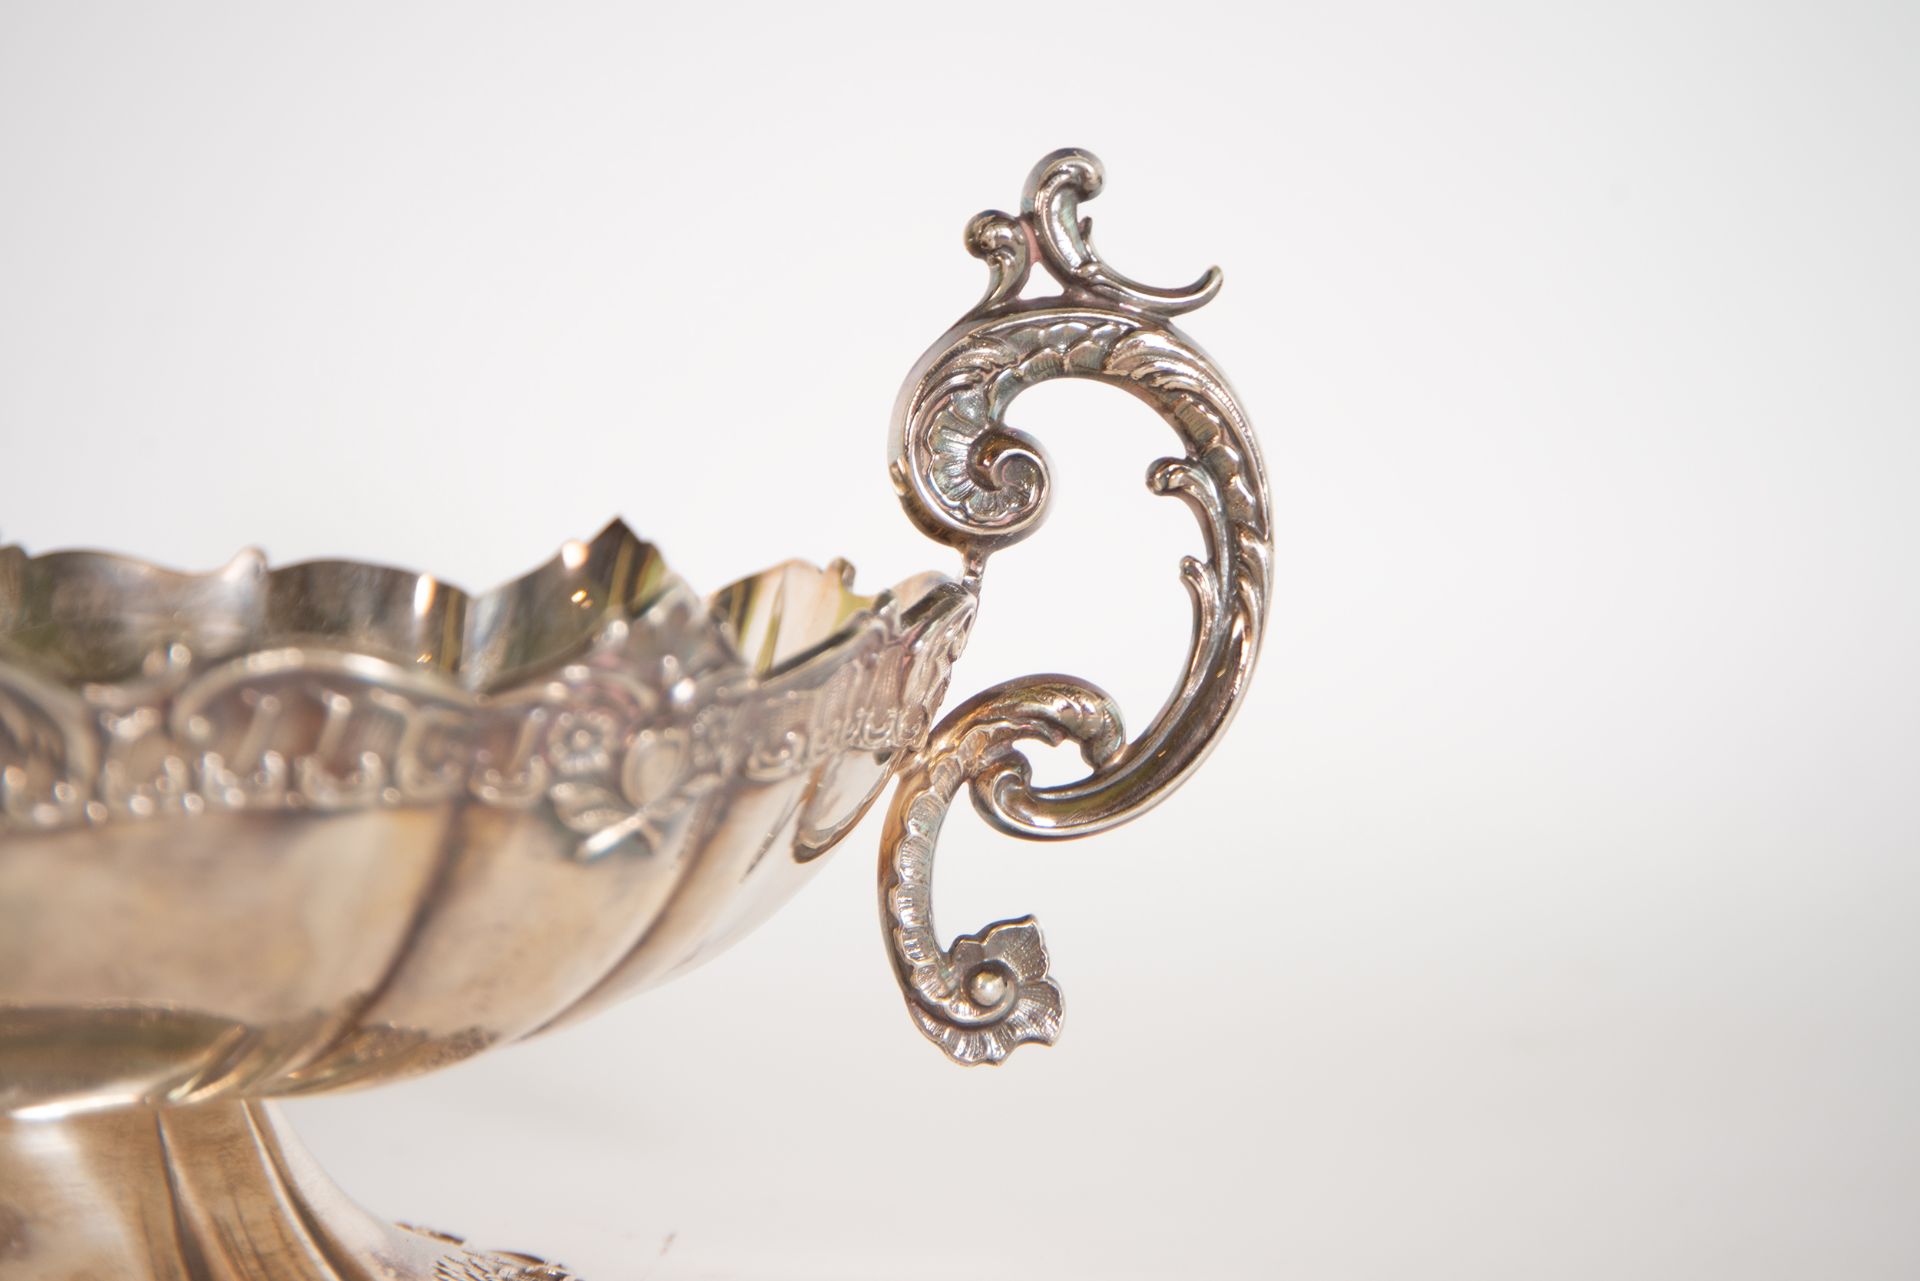 Important fruit bowl in solid sterling silver, French school of the 19th century - Image 3 of 5